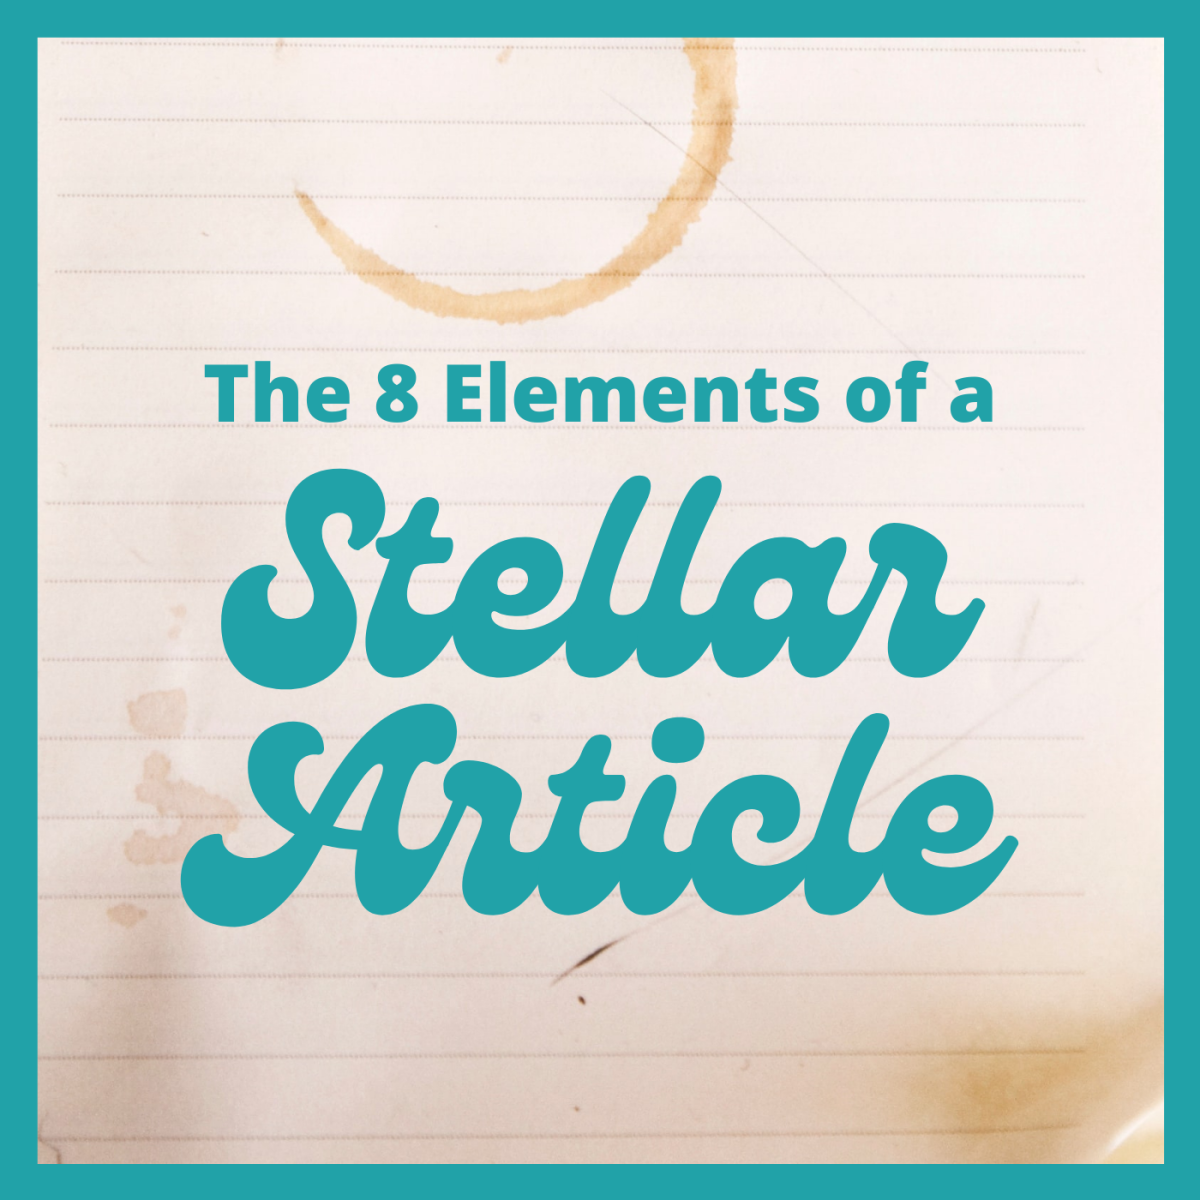 Elements of a Stellar Article